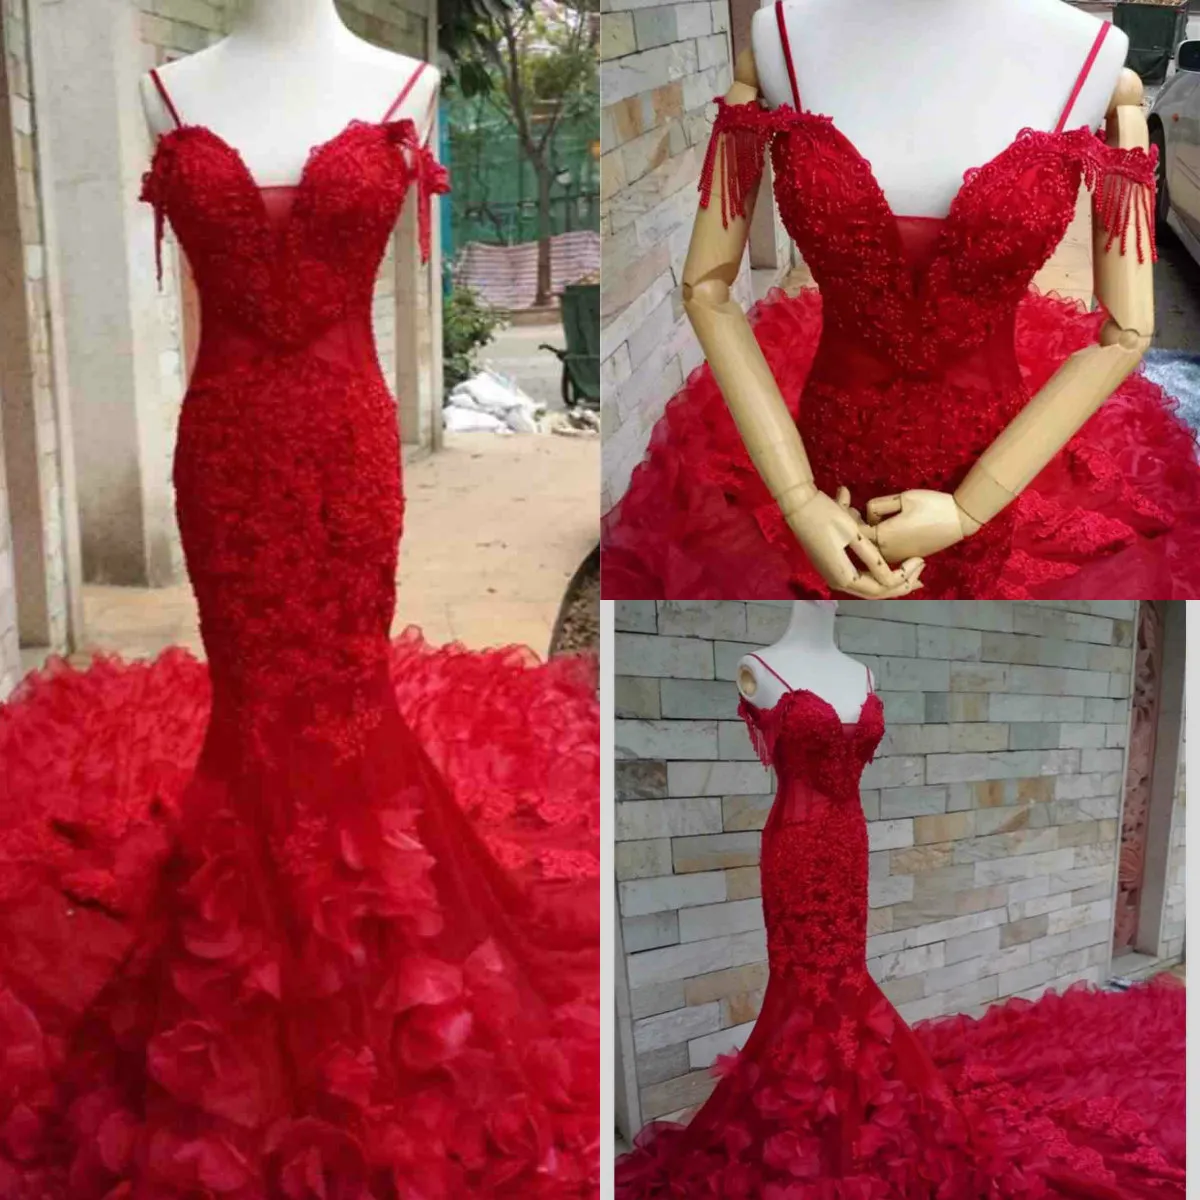 2019 Red Evening Dresses Spaghetti Lace Appliques Pearls Tassel Floral Flowers Gorgeous Prom Dress Custom Made Formal Party Gowns